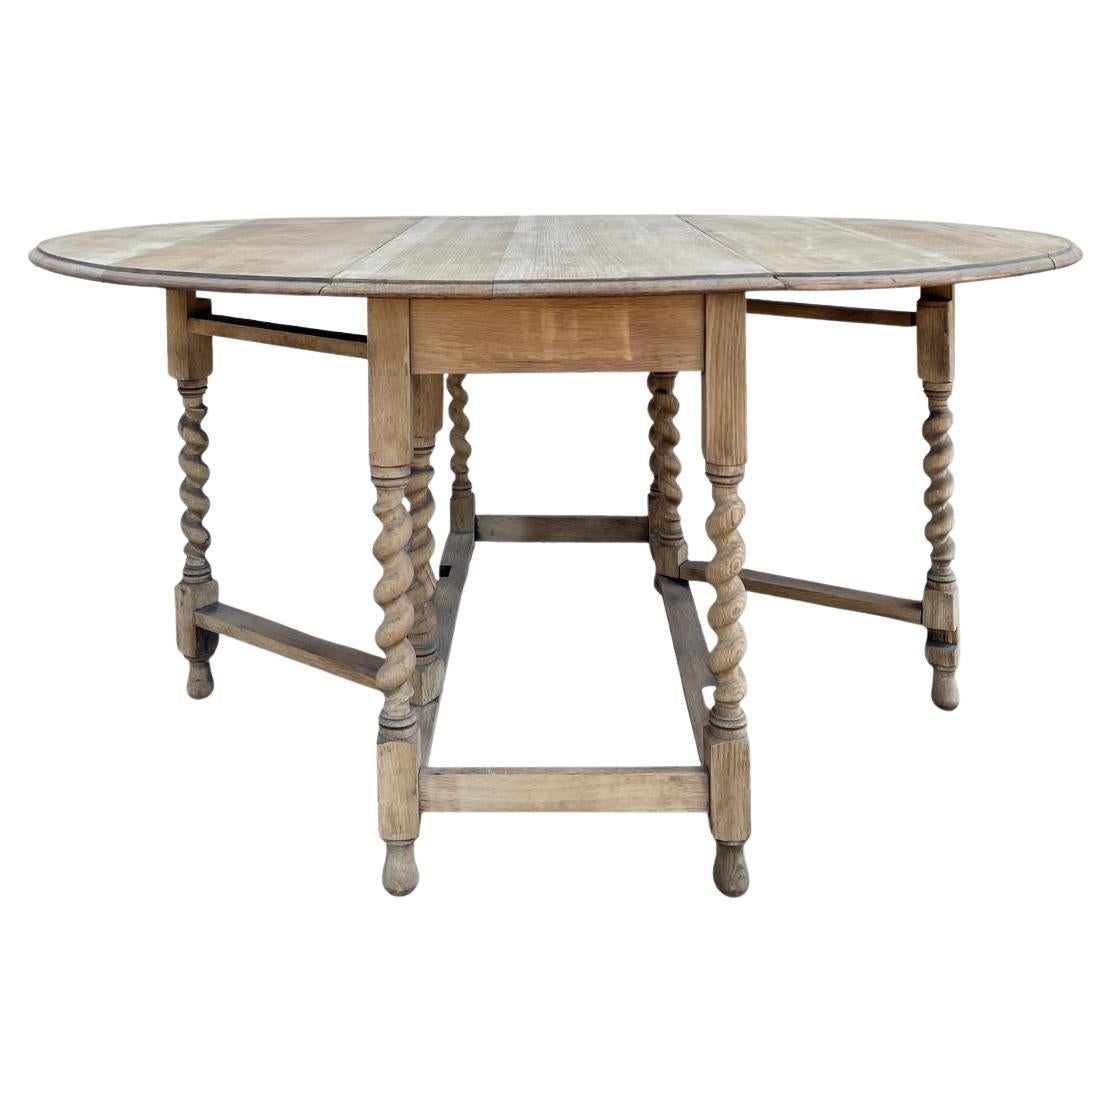 What is a gateleg table?